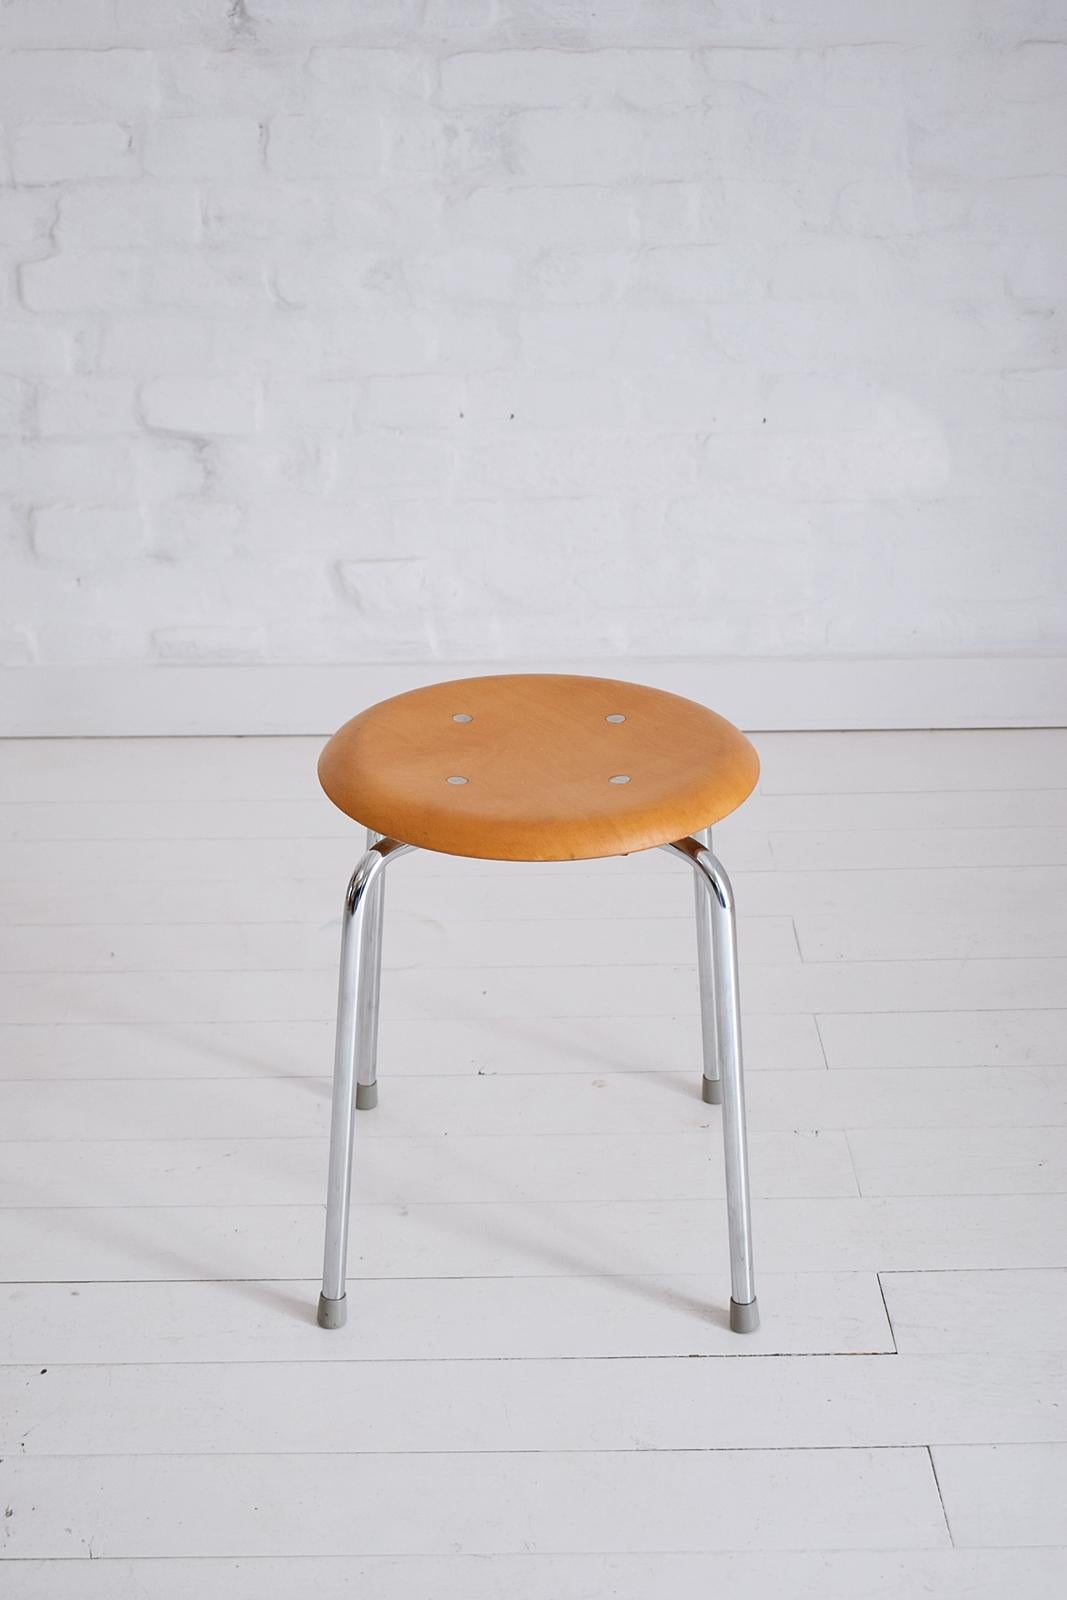 Nice round stool with curved chrome-plated steel frame and moulded seat of laminated wood veneer.
An original Bauhaus design from the 1950s. It works perfectly as a seat and as a small table.
More pieces available.